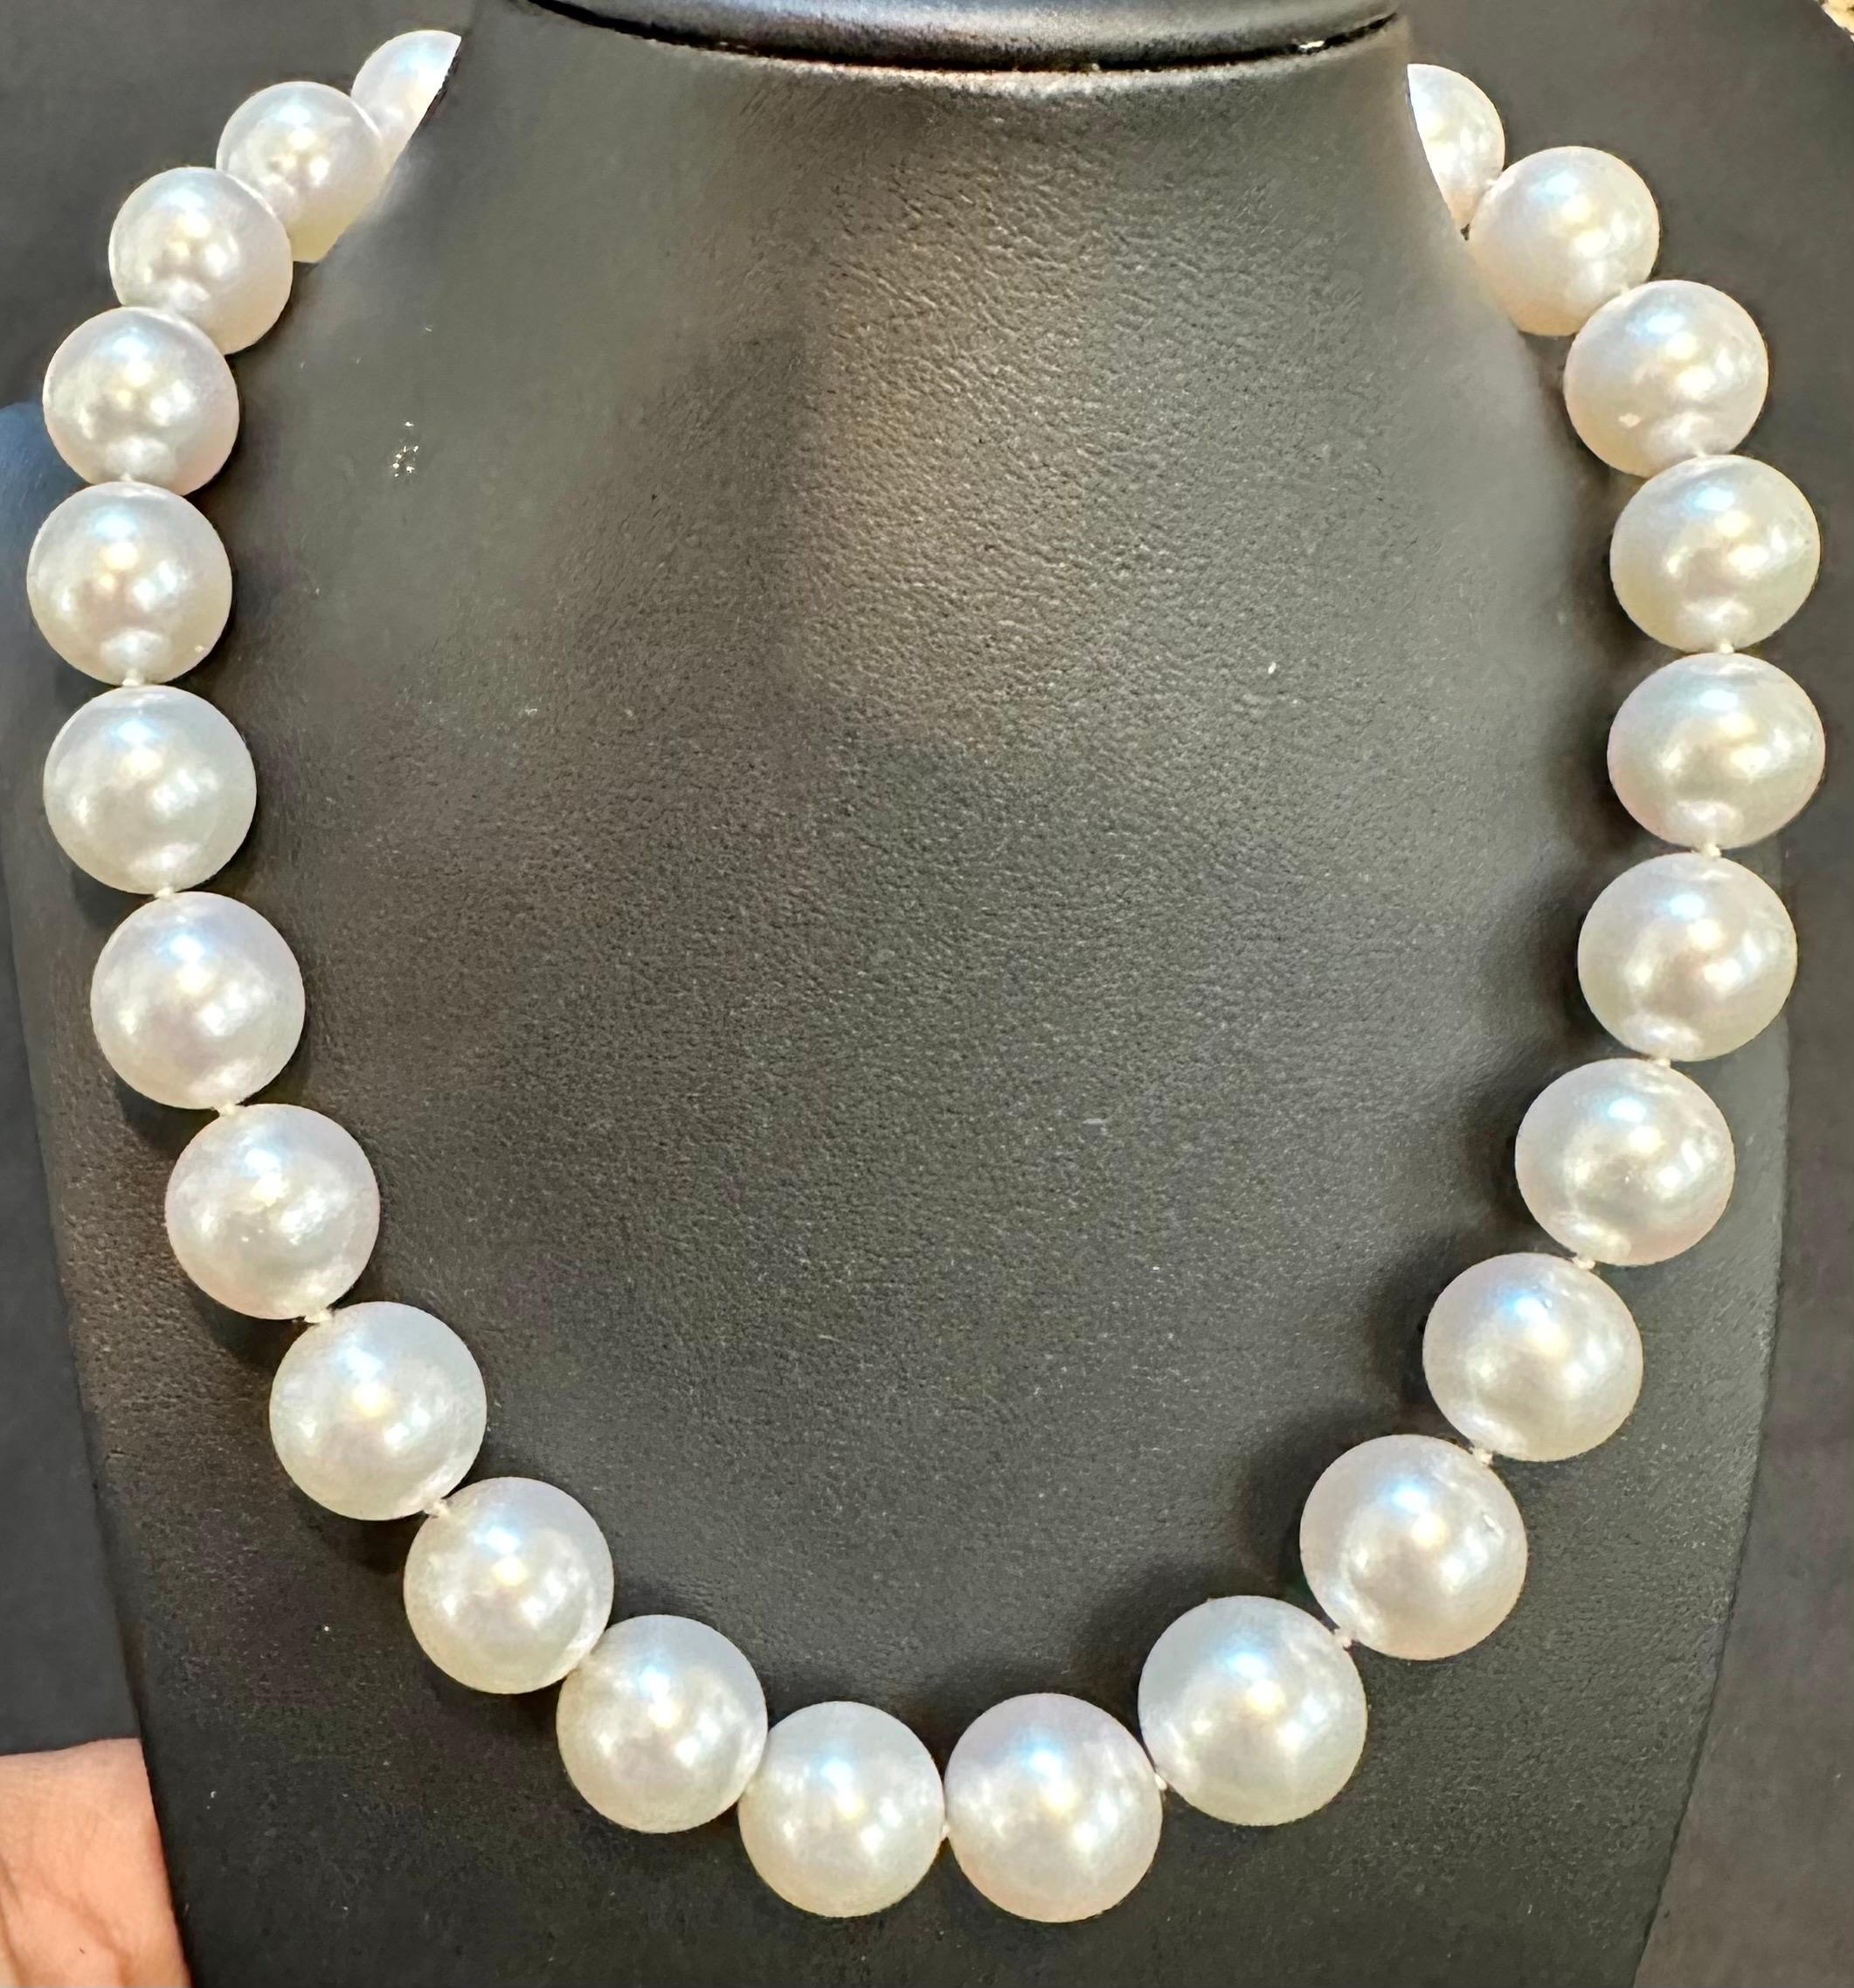 13-16 mm White South Sea Round Pearl Necklace - AAA Quality, 27 Pieces , full diamond Diamond Ball clasp in 18 karat white gold 
Introducing our exquisite 13-16mm  White South Sea Round Pearl Necklace - AAA Quality. This stunning piece features 27